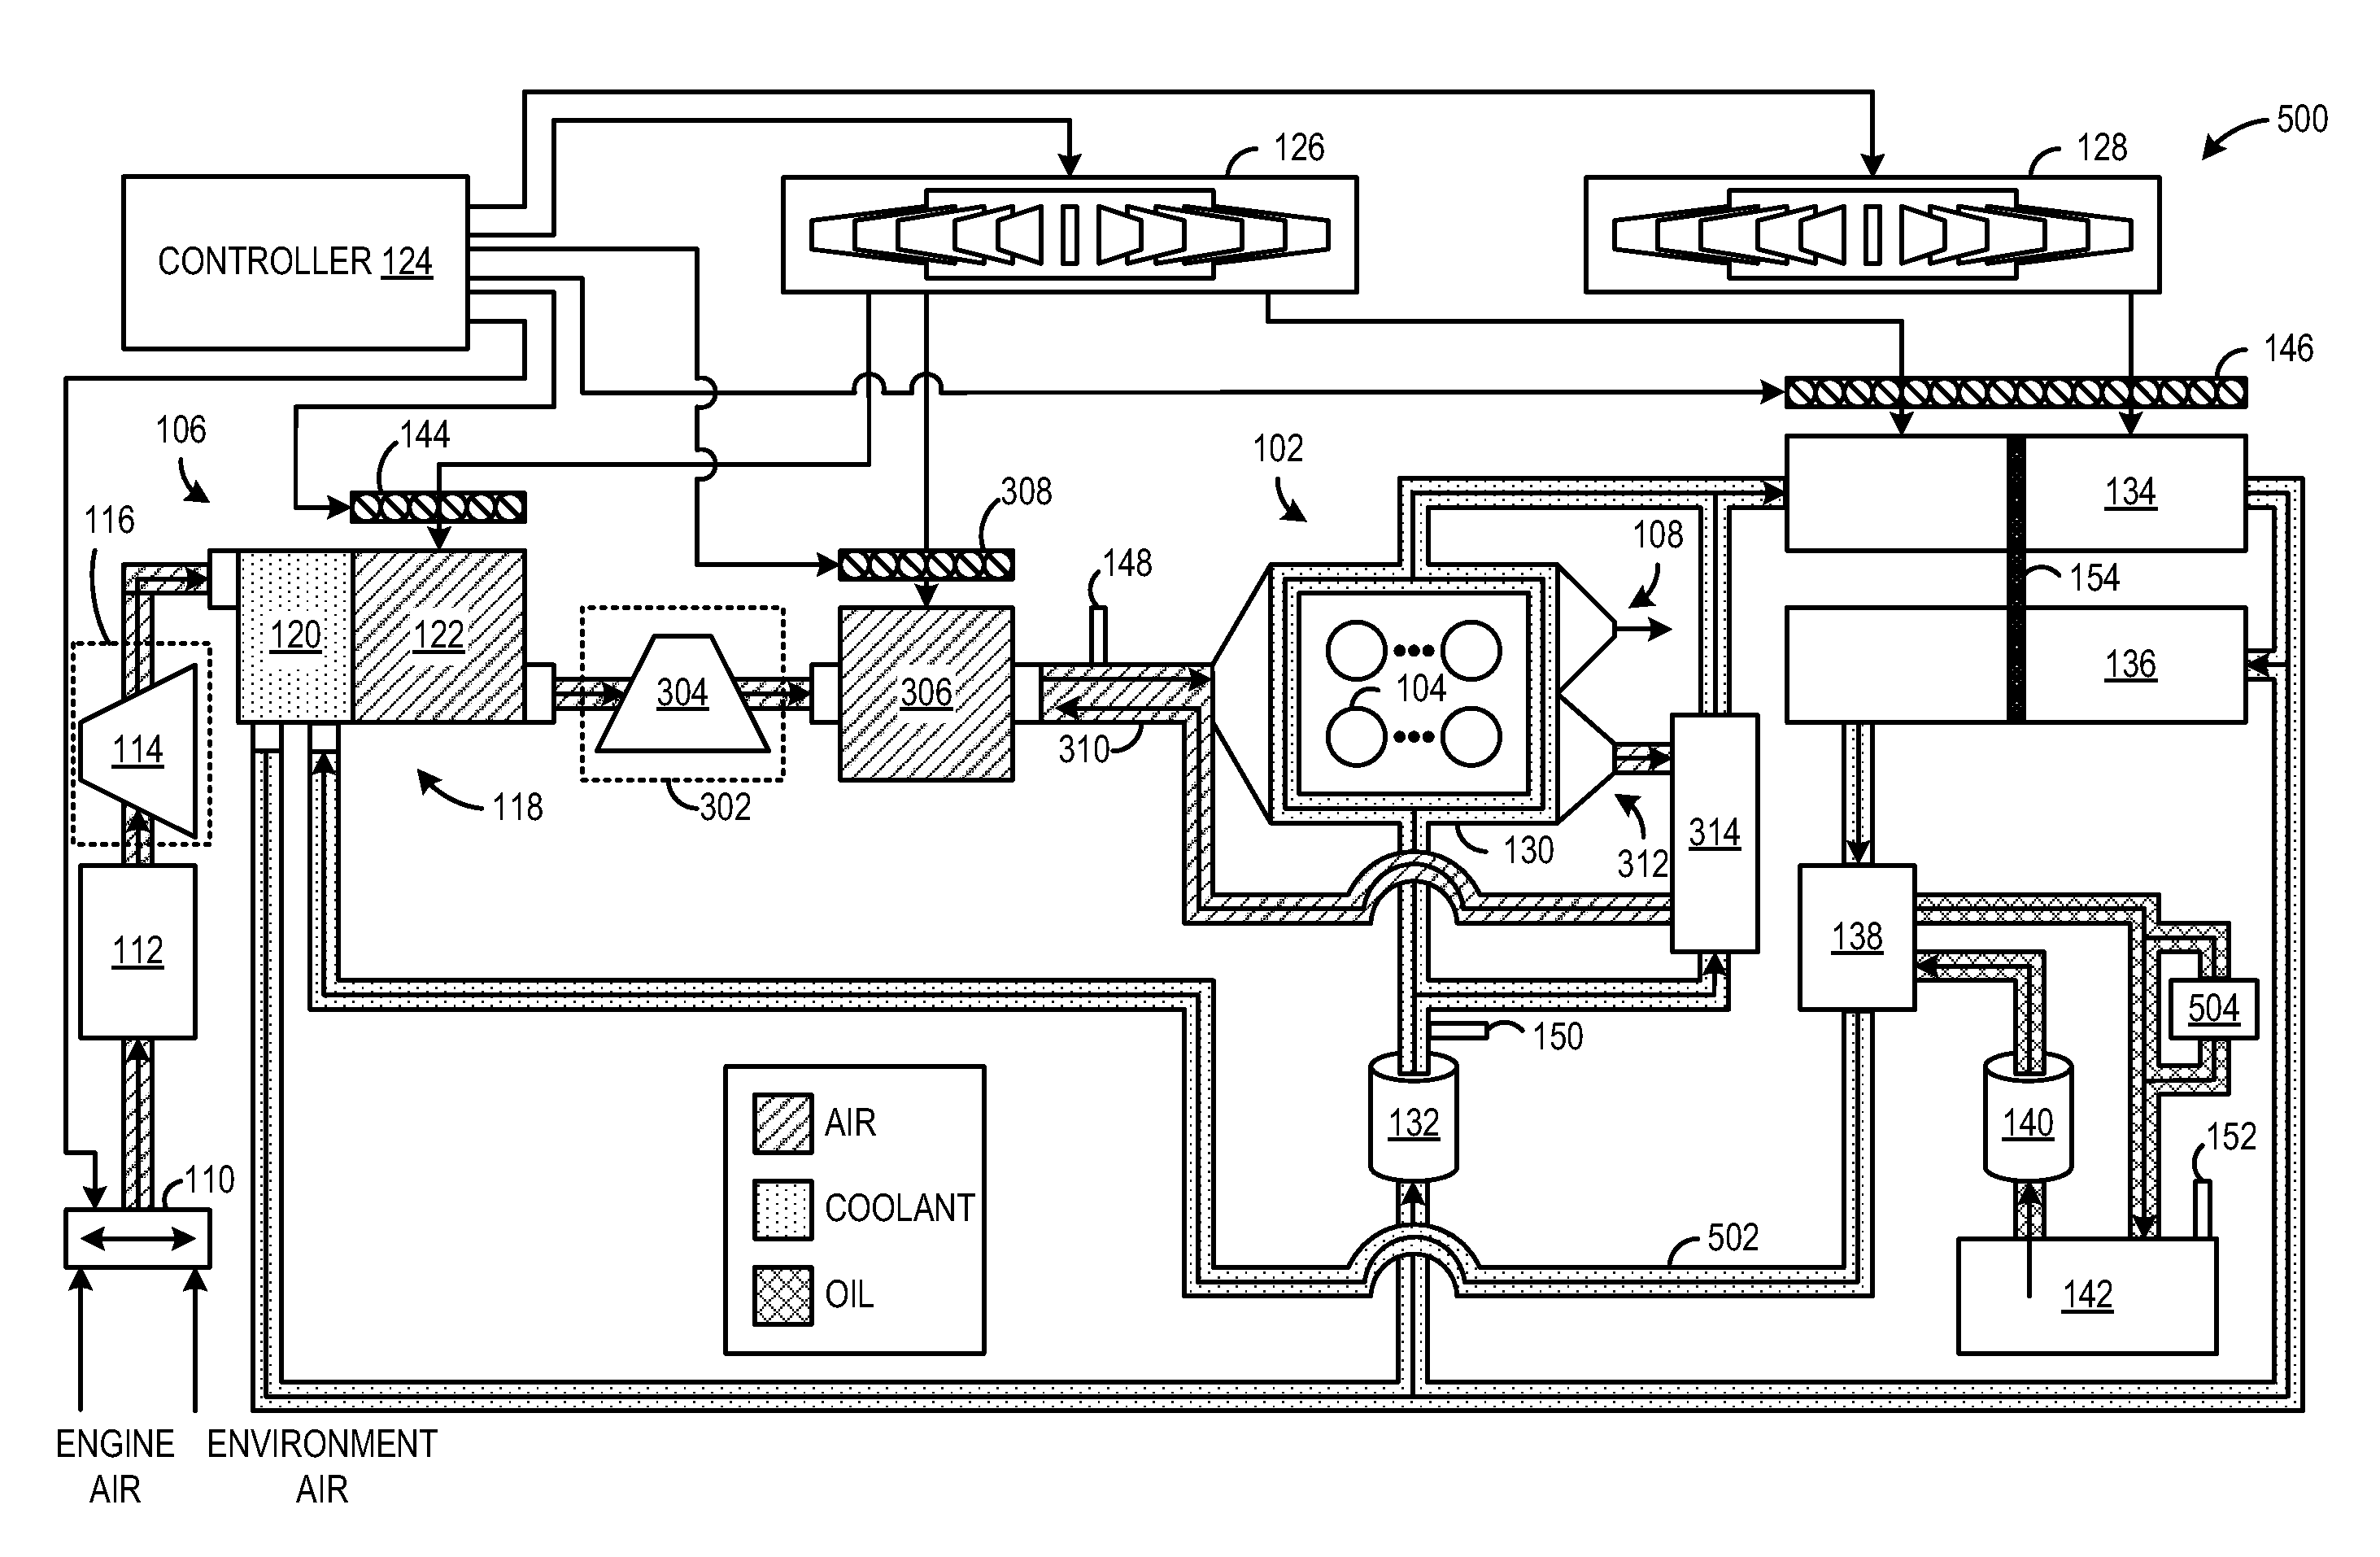 Thermal management systems and methods